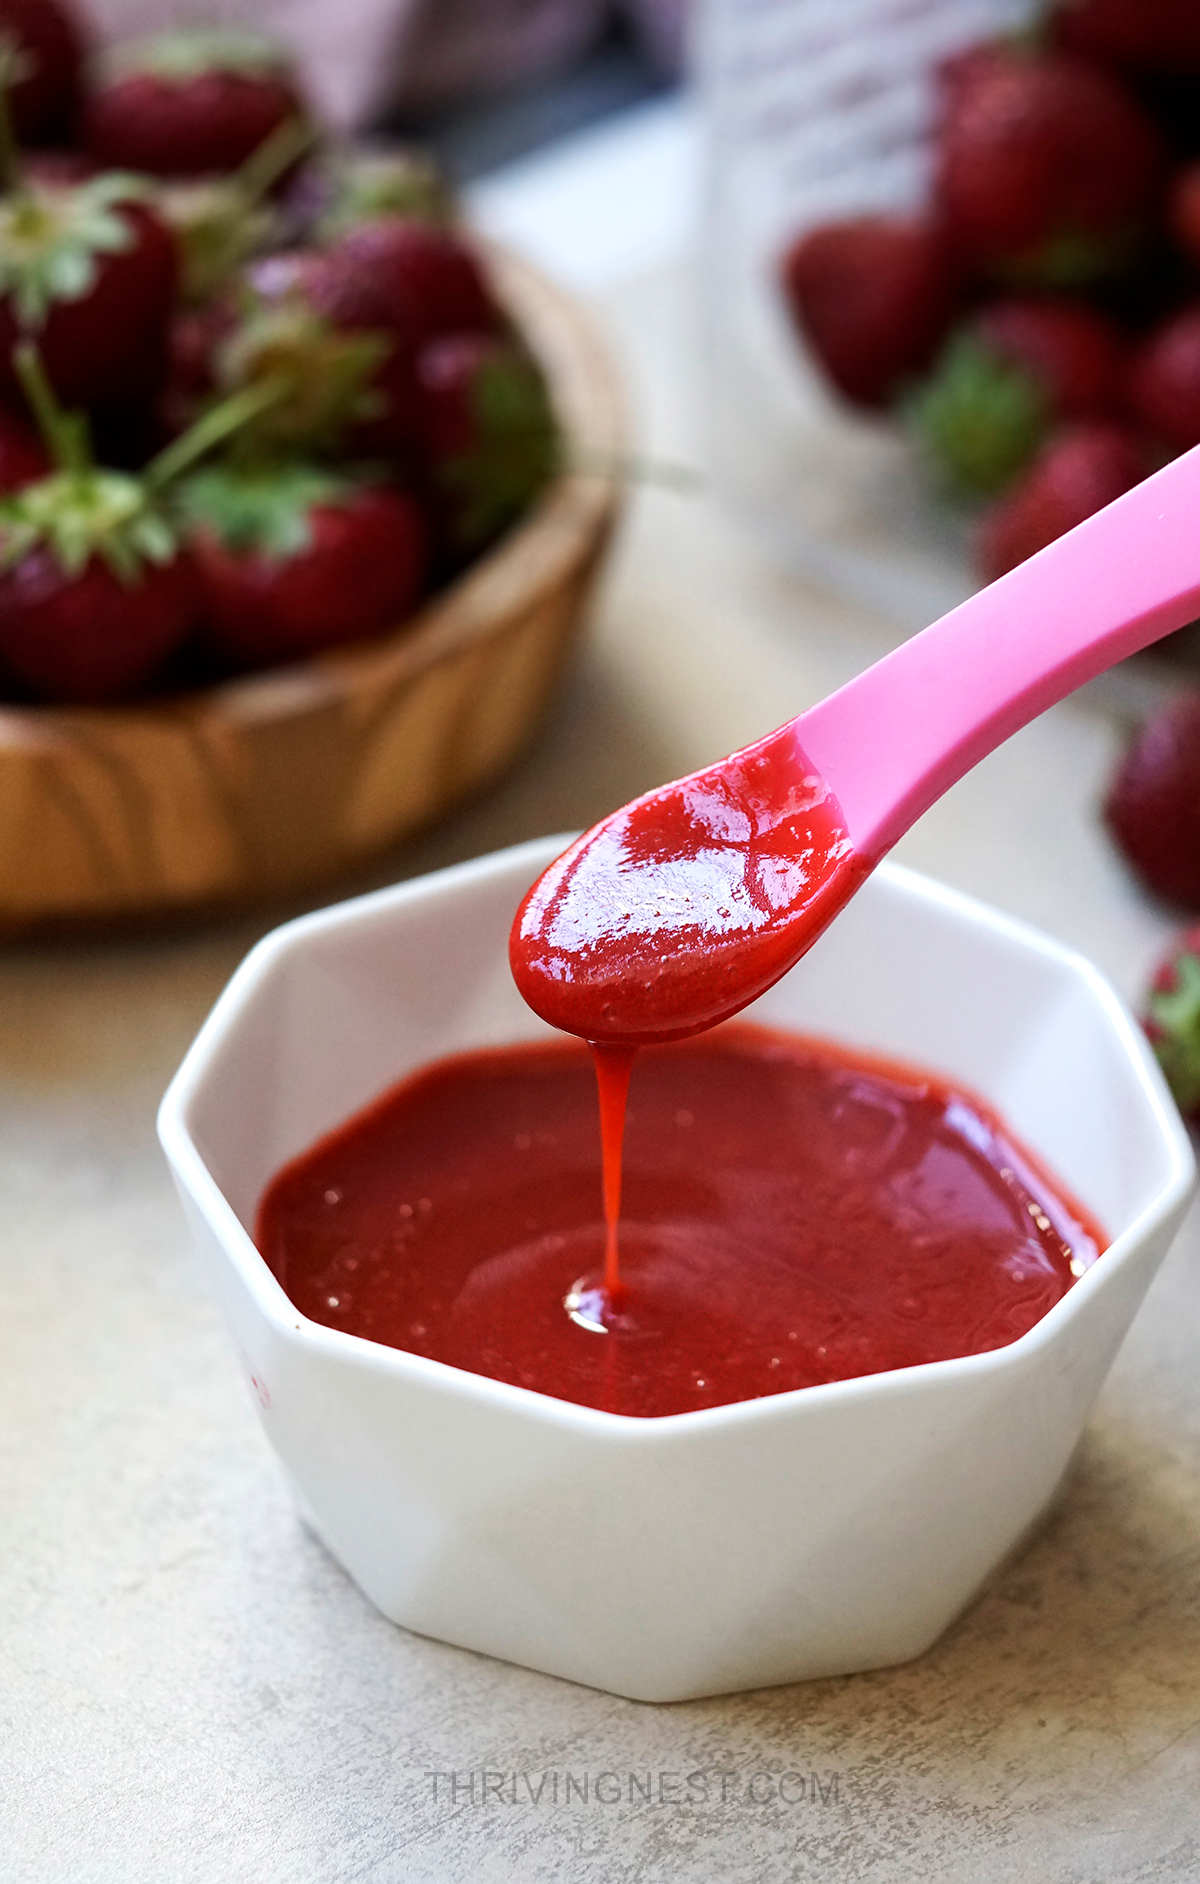 Strawberry puree for baby in a small bowl.